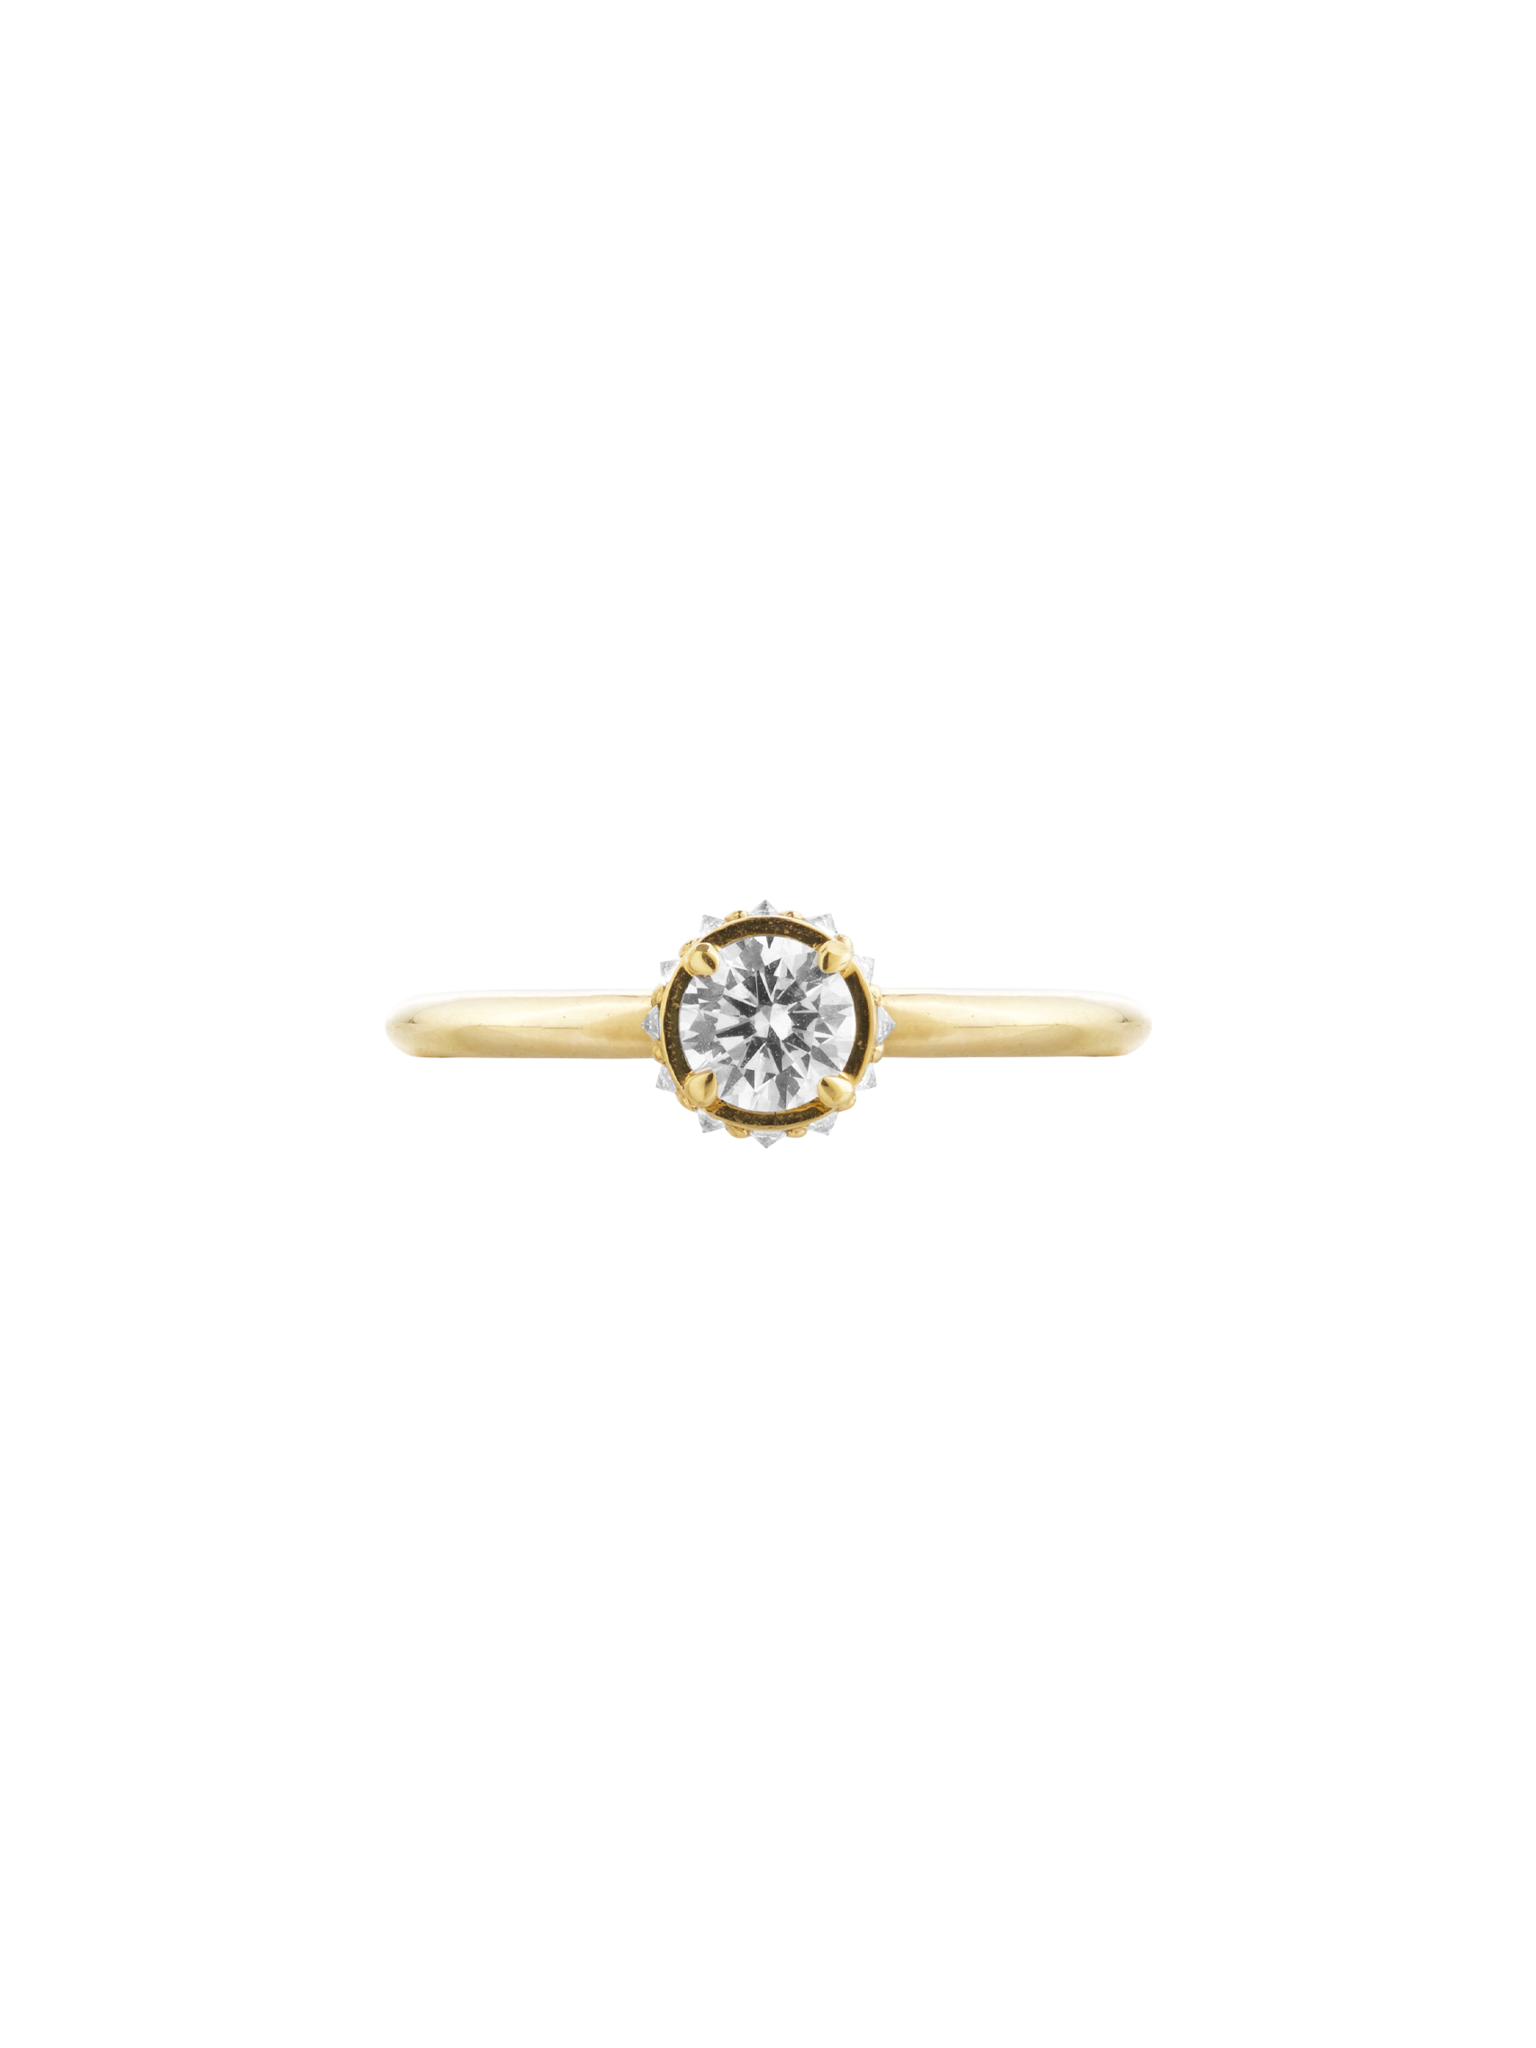 Cosmos ring solar, 0,41 ct total, yellow